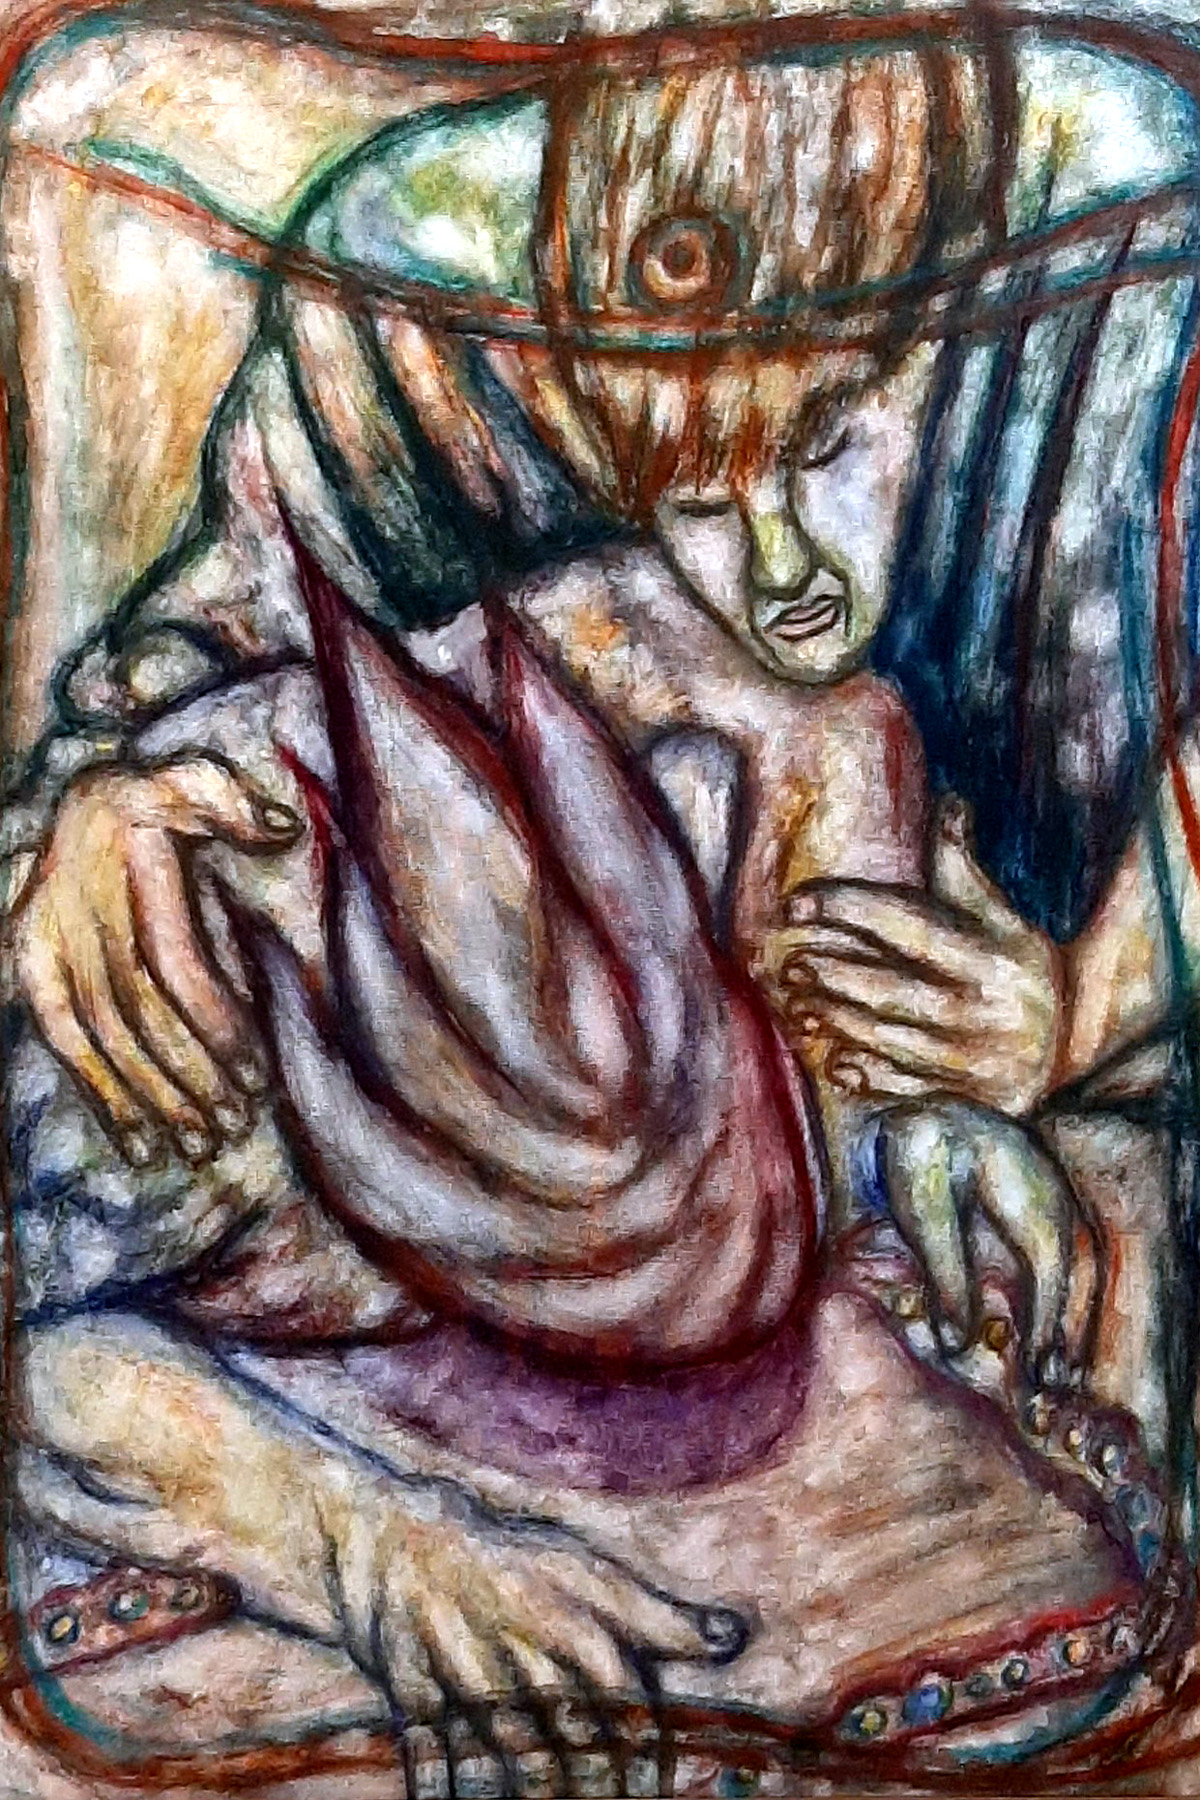 Stephen Mead: 'PocketTwo', 1995 Watercolor, Political.  Evocative griefconsolation, incorporated into the series Blue Heart Diary, part of the DVD Captioned Closeness, Indieflix.  com. ...